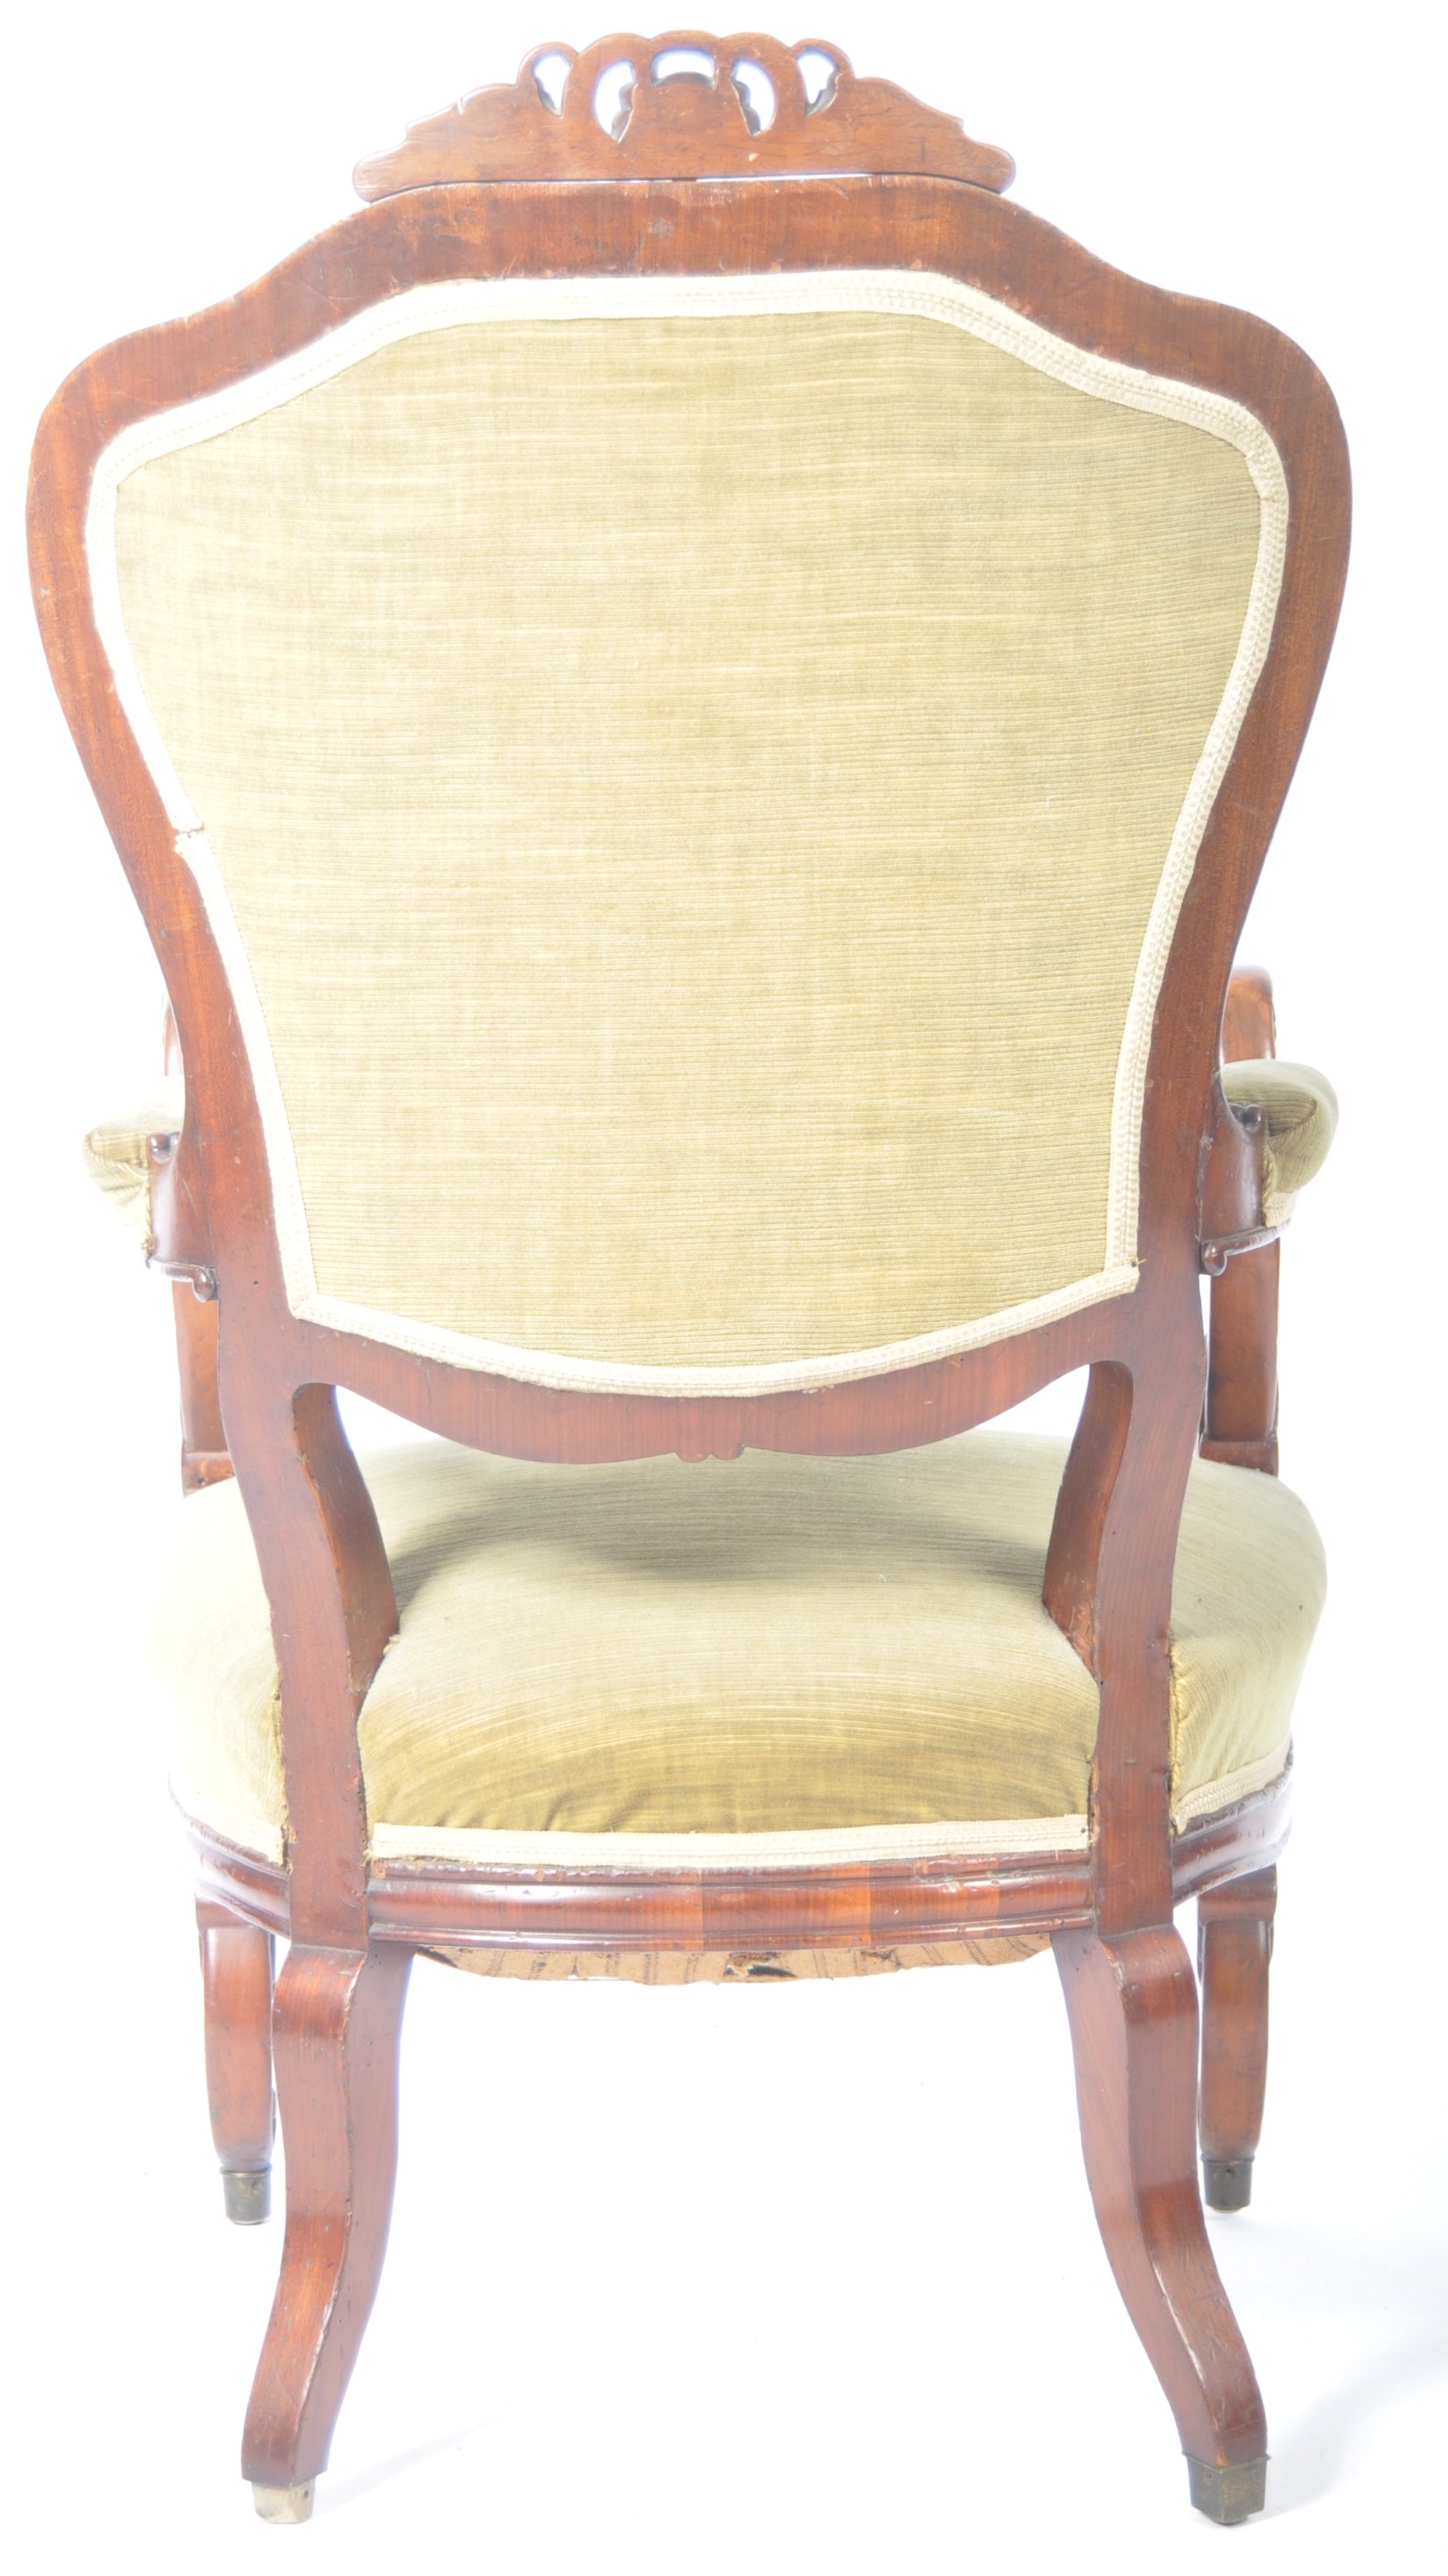 19TH CENTURY WALNUT ANTIQUE ARM CHAIR WITH ANIMAL HEAD ARMRESTS - Image 7 of 8